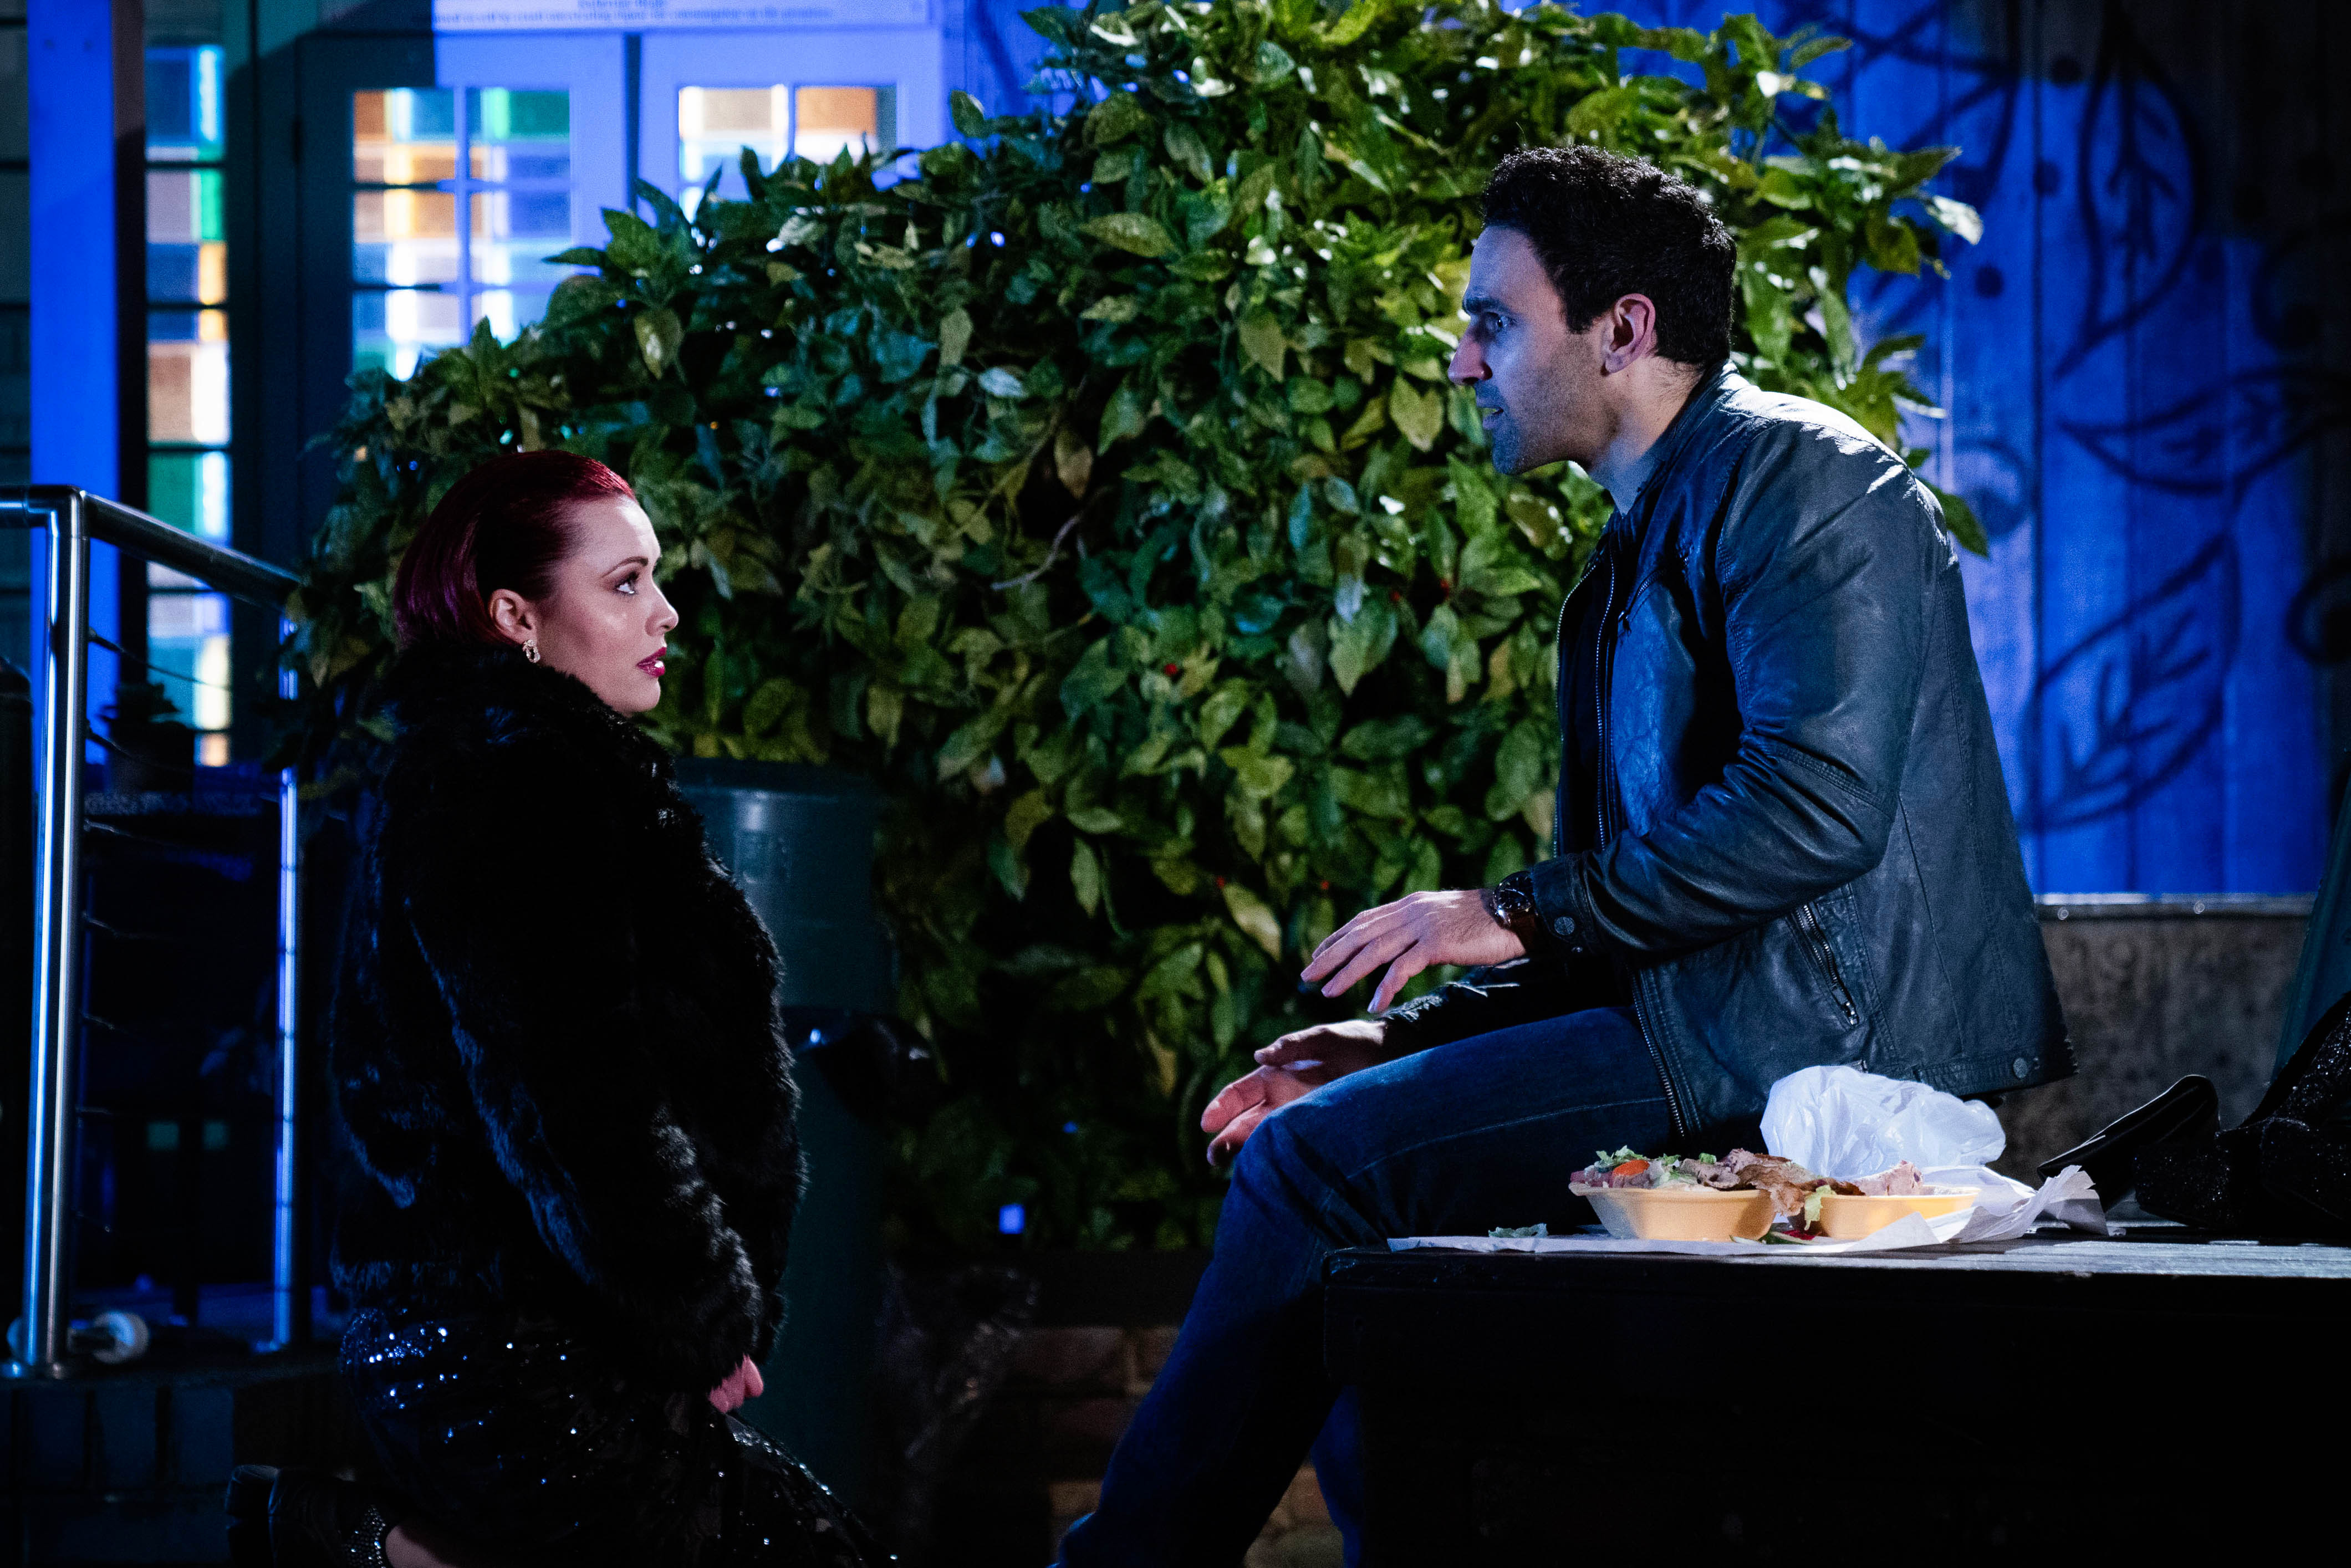 EastEnders spoilers: Whitney Dean proposes to Kush Kazemi but a shock exit follows